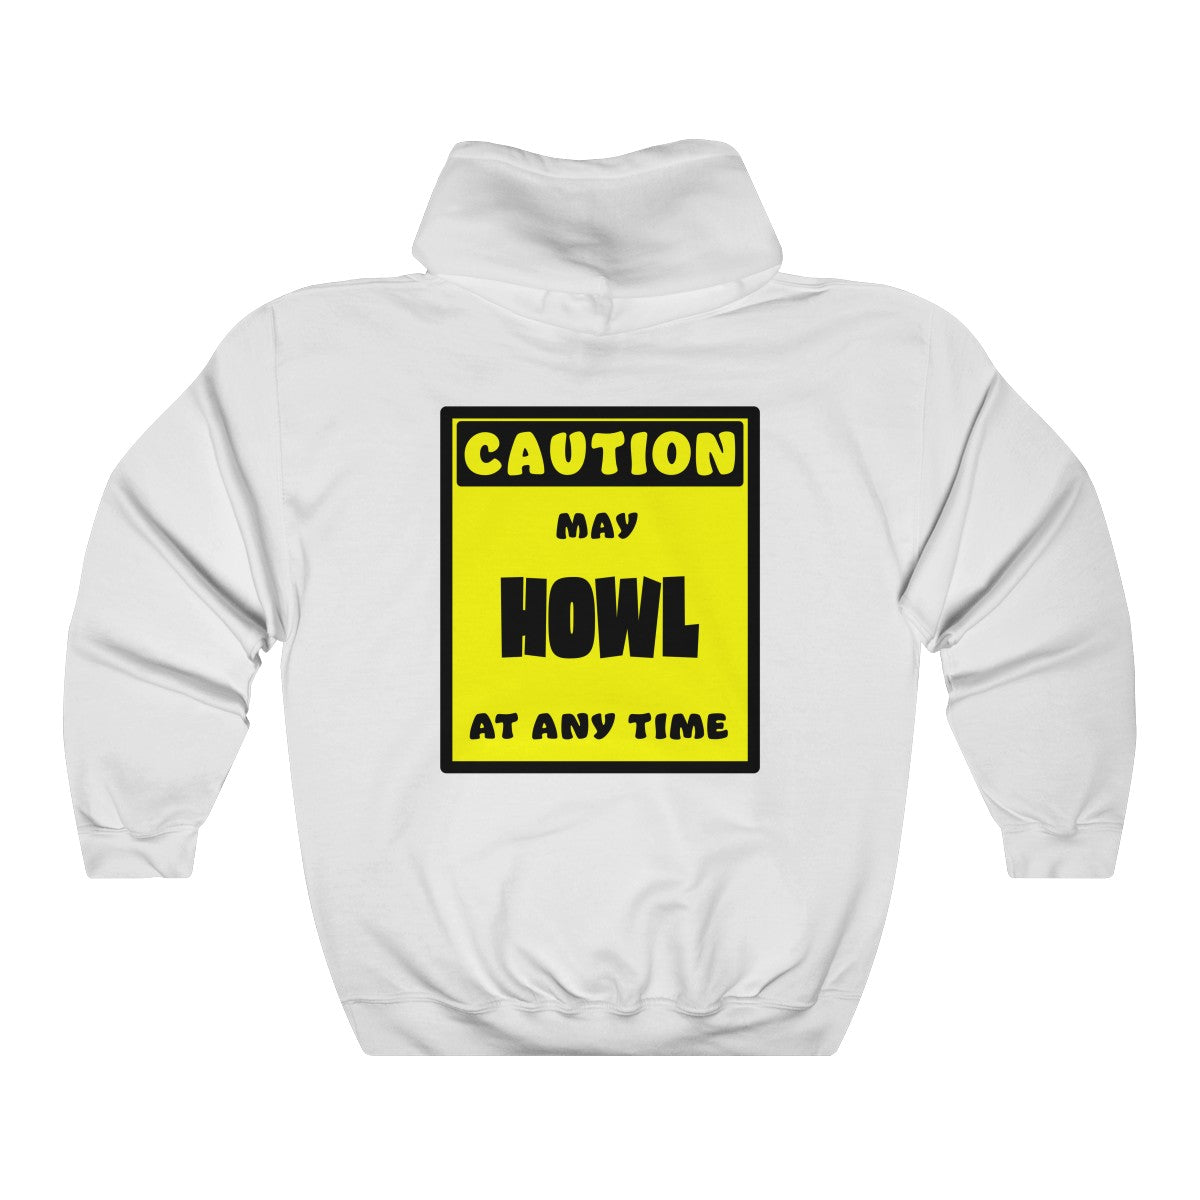 CAUTION! May HOWL at any time! - Hoodie Hoodie AFLT-Whootorca White S 